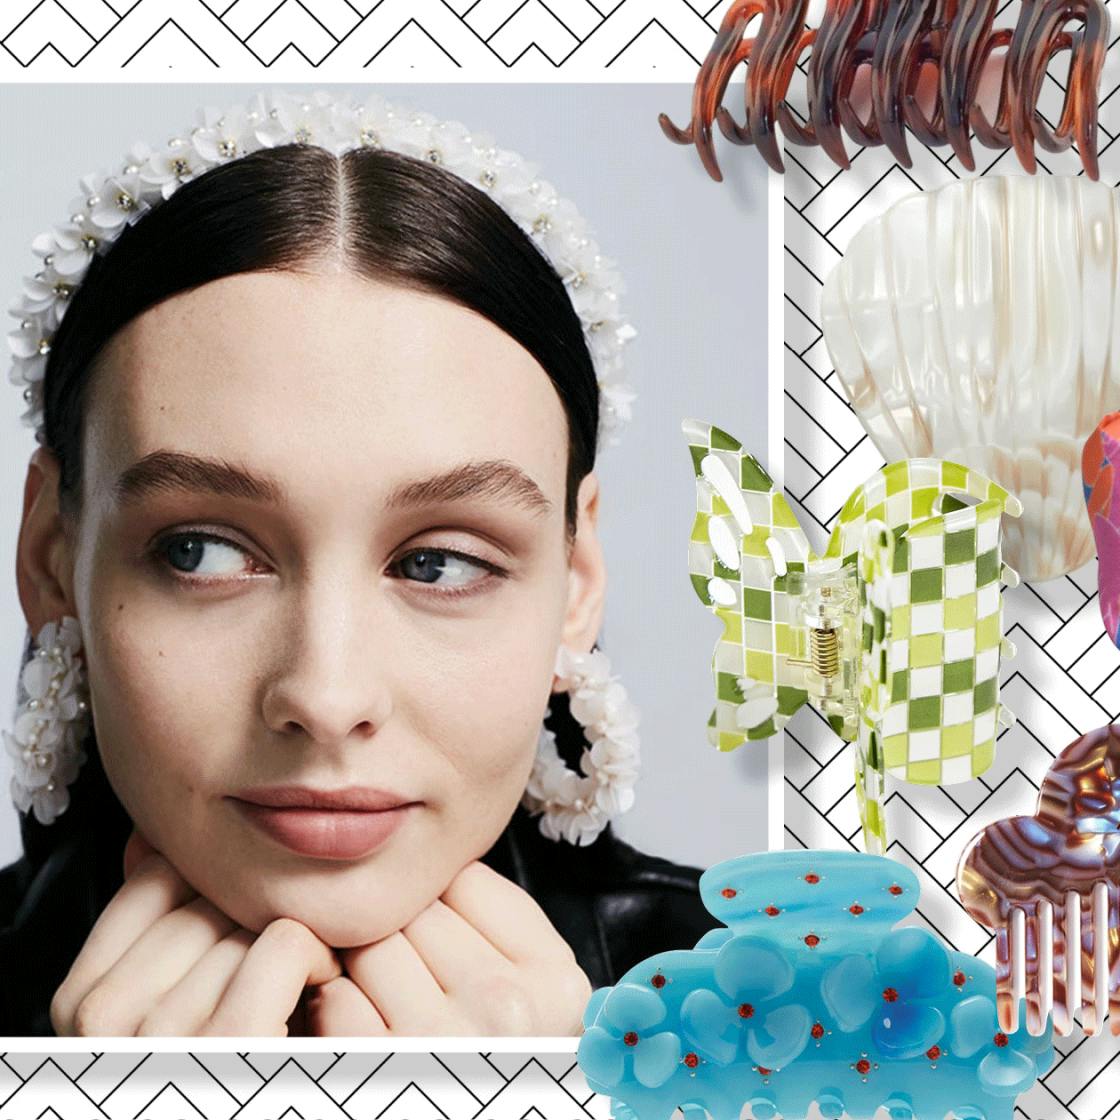 17 summery hair clips, pins and headbands to accessorise with